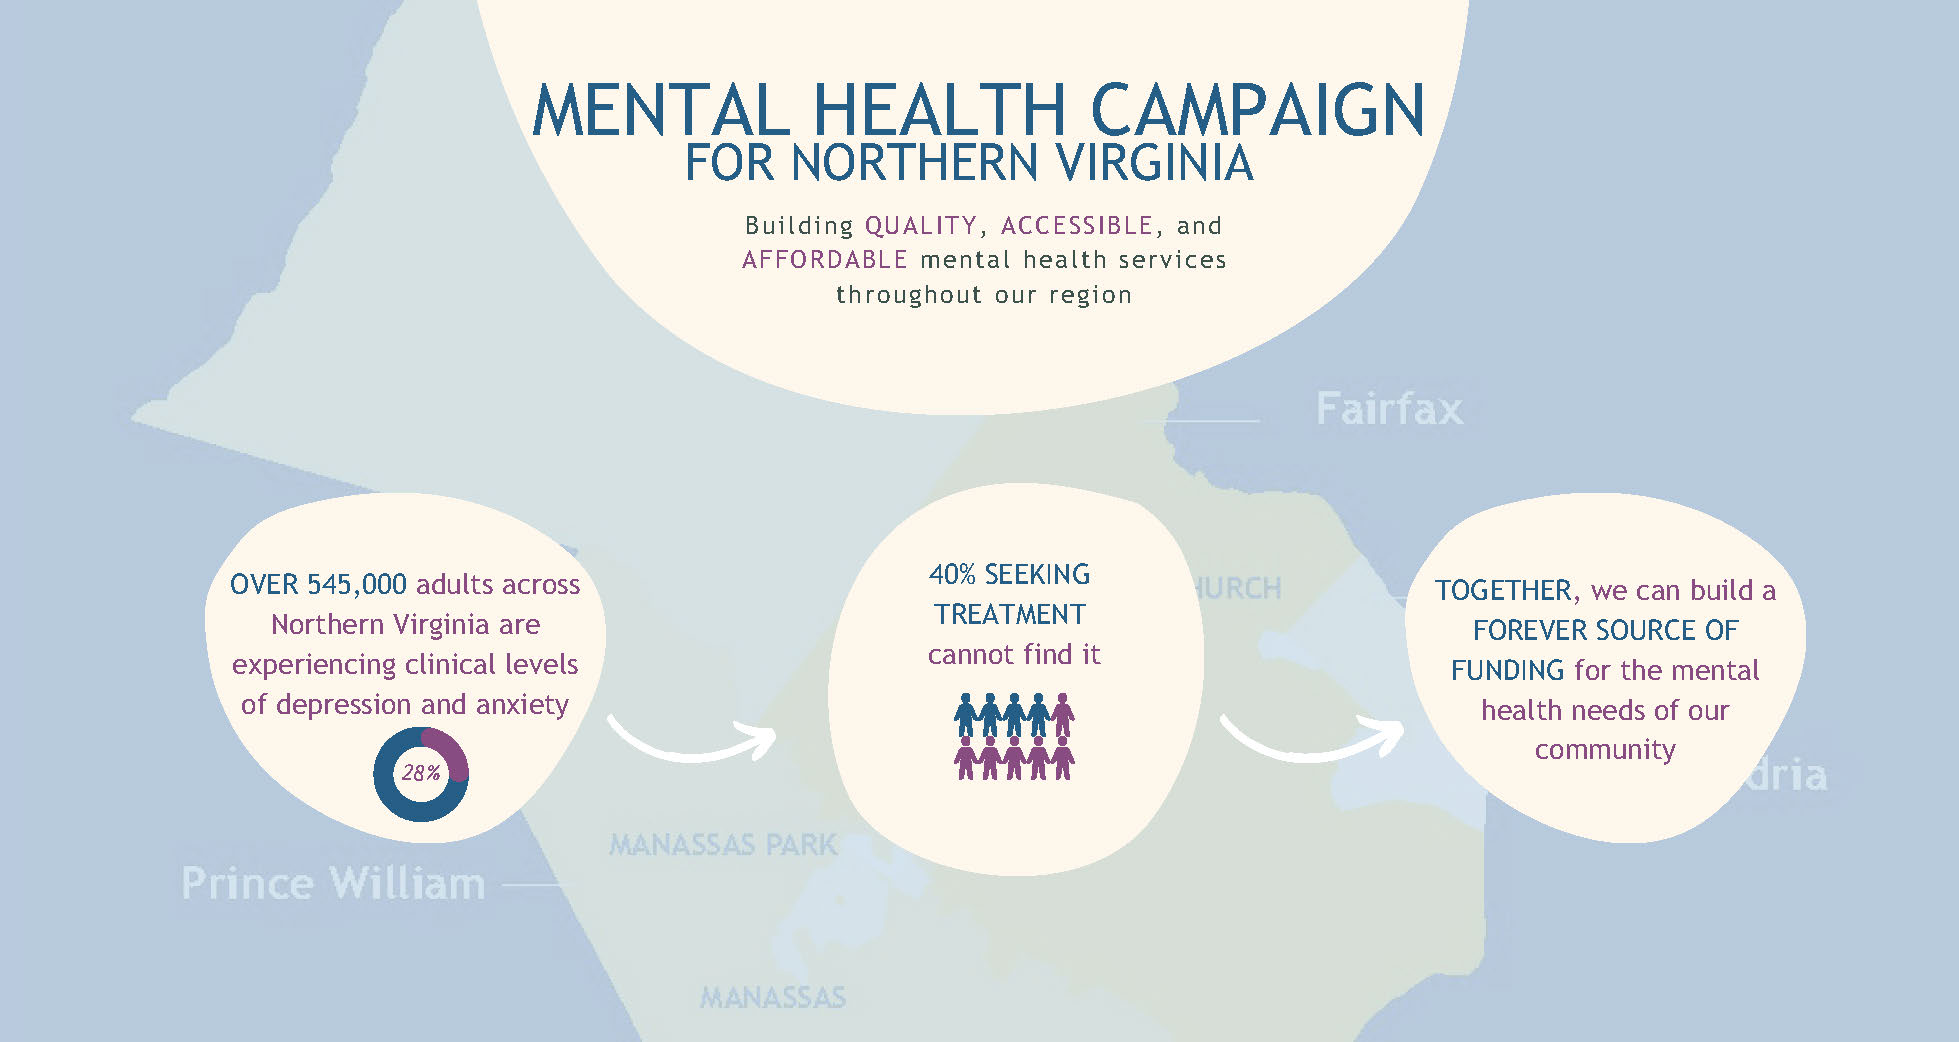 Mental Health Campaign for Northern Virginia